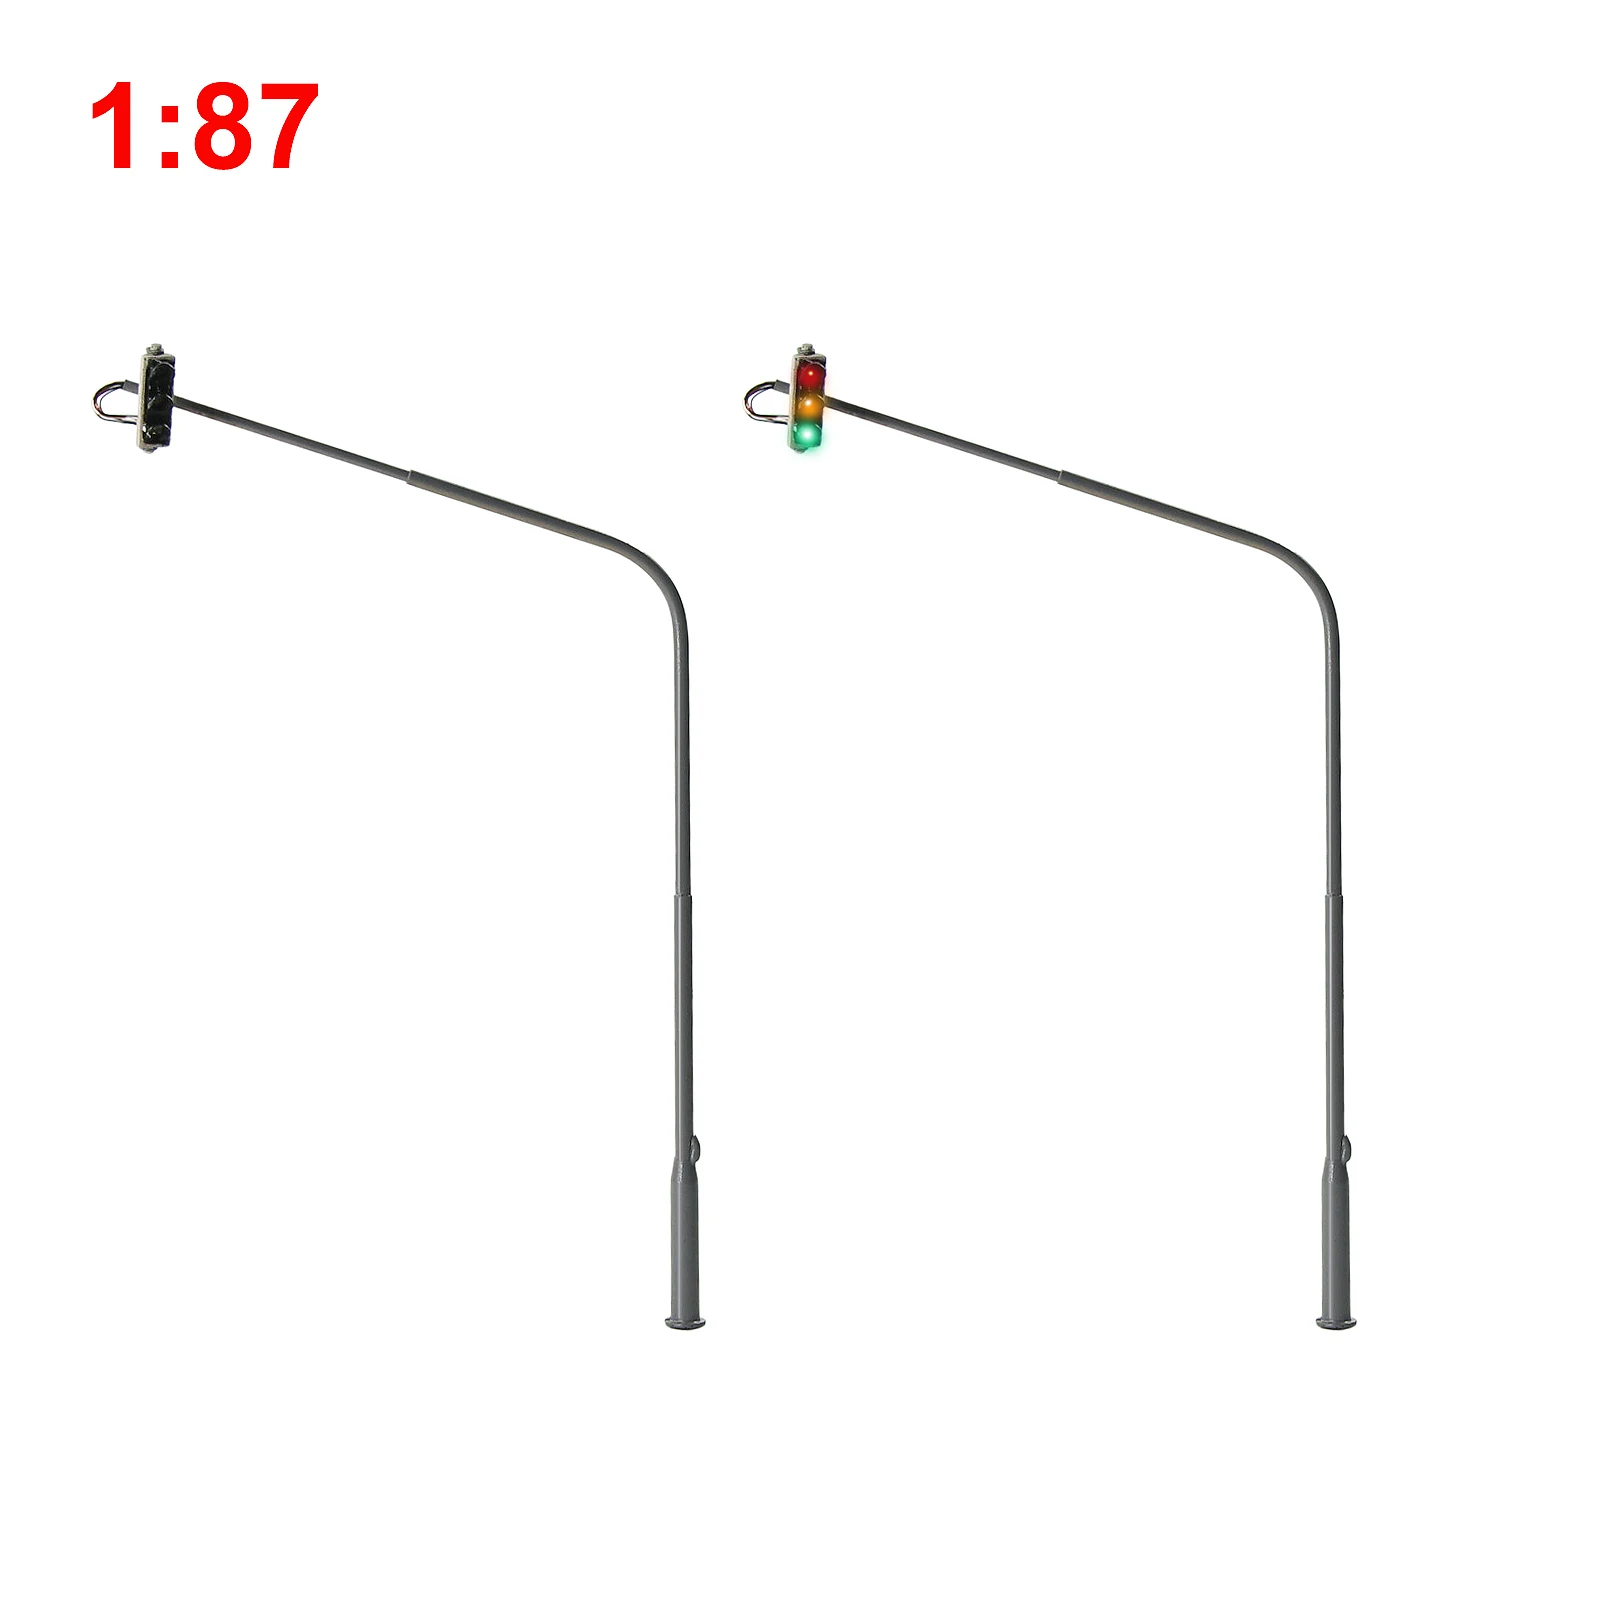 2pcs HO Scale 1:87 Traffic Signals City Motorway Crossing Right Driving Lights Red Yellow Green JTD8711